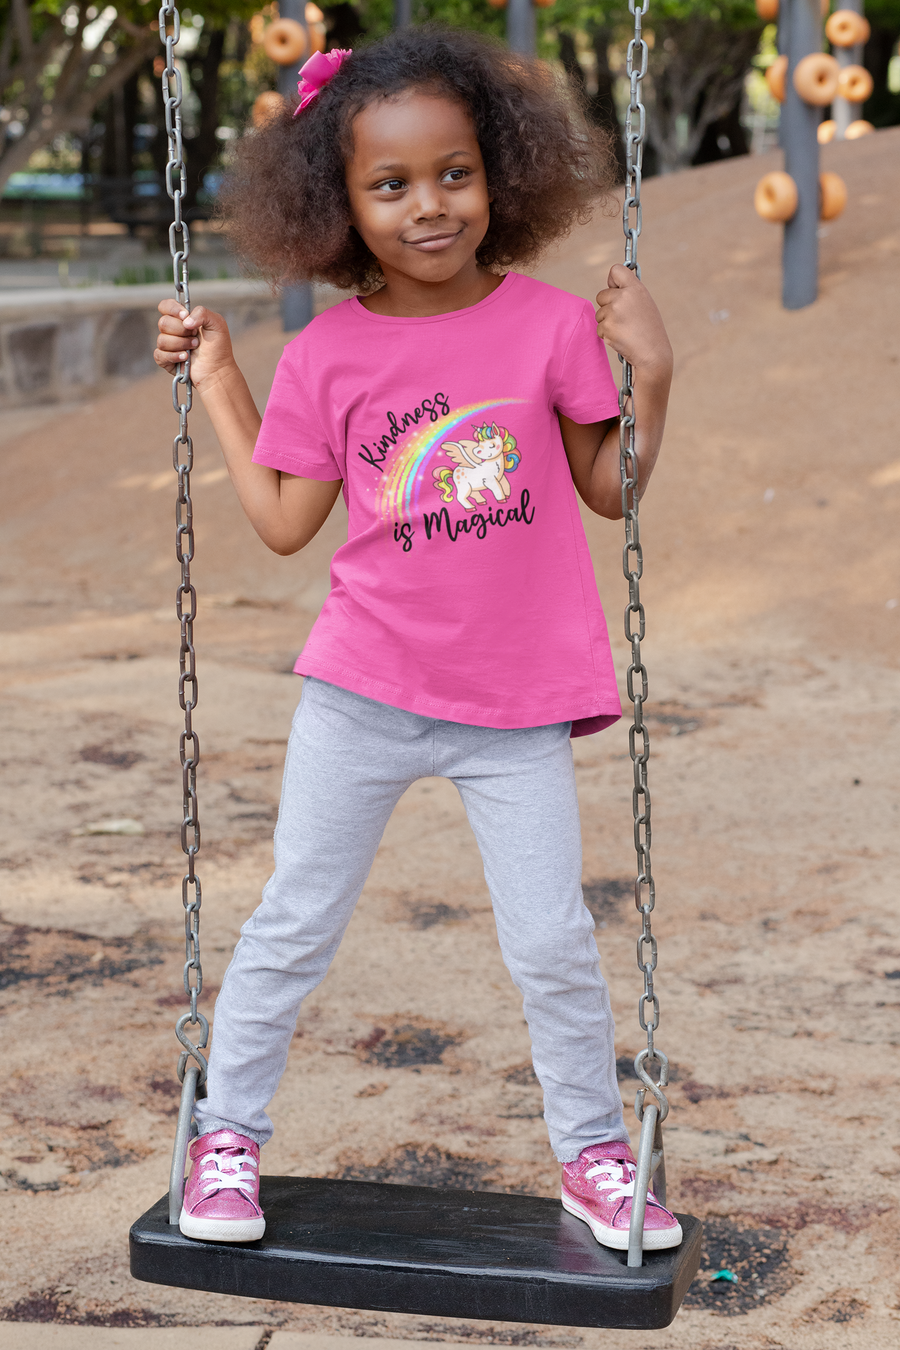 Kindness Is Magical Unicorn Tee (Infant Sizes up to Adult 5X)